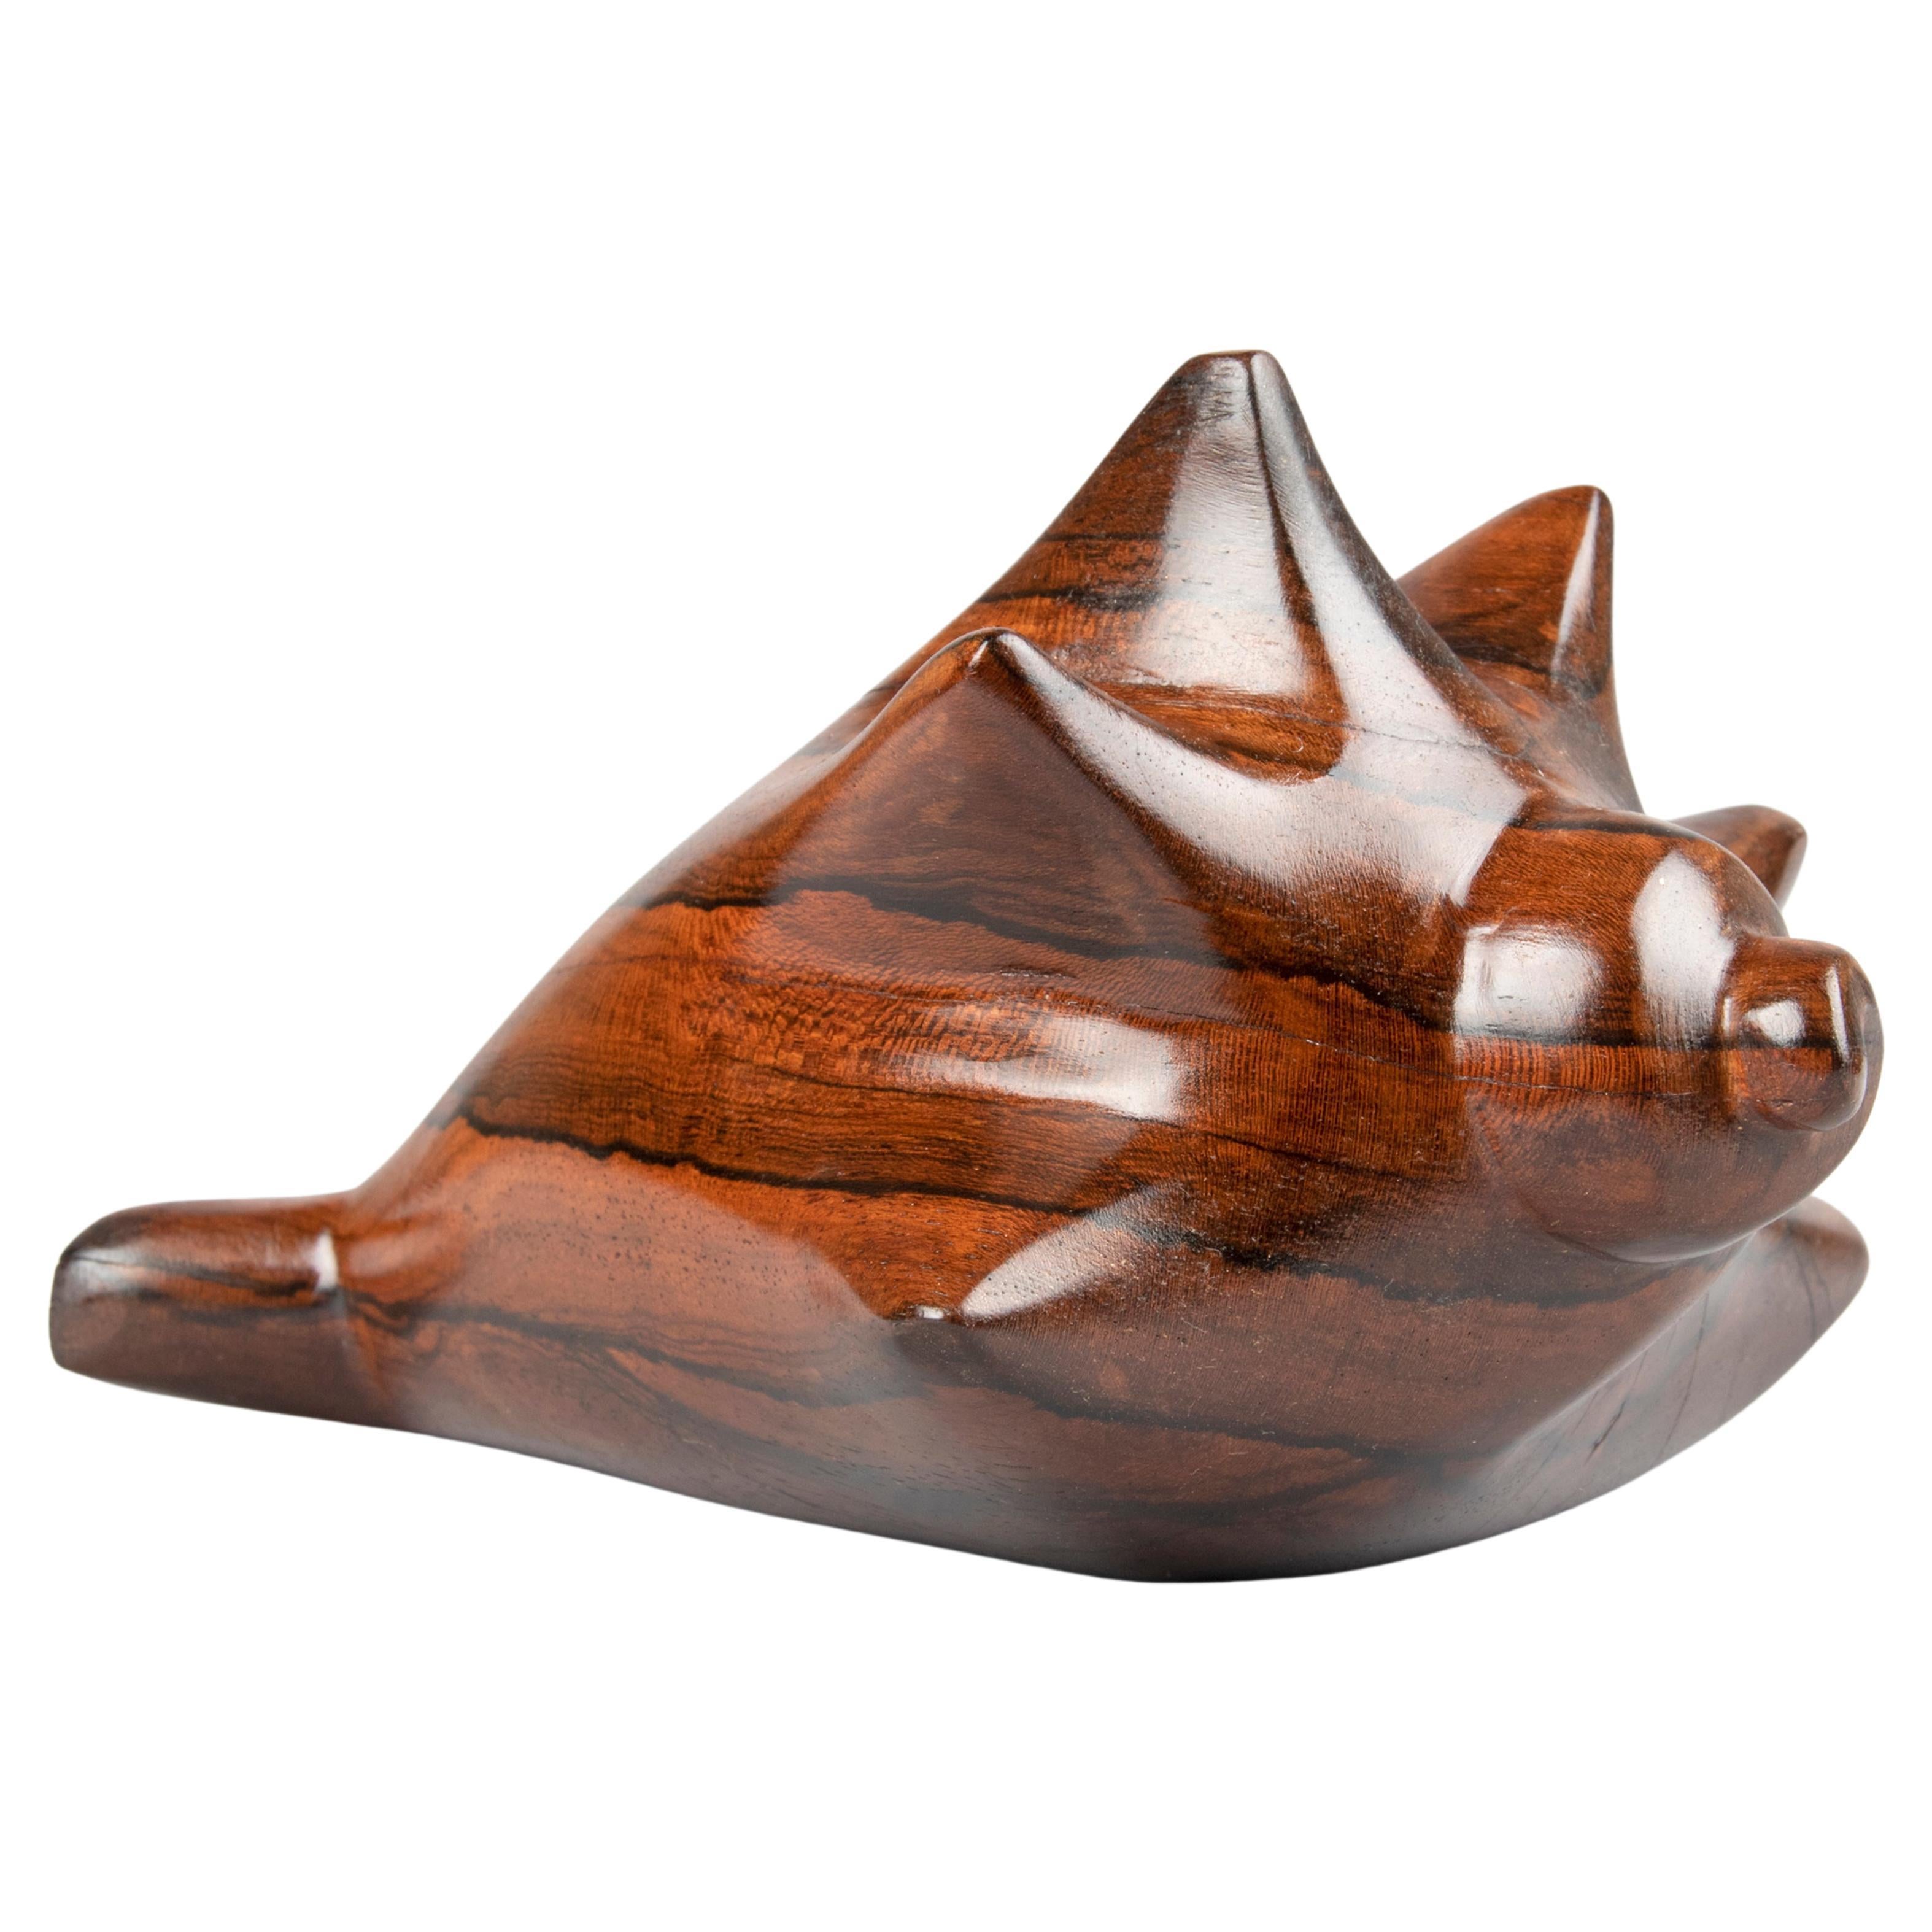 Mid-Century Modern Wooden Sculpture Shaped as a Shell For Sale